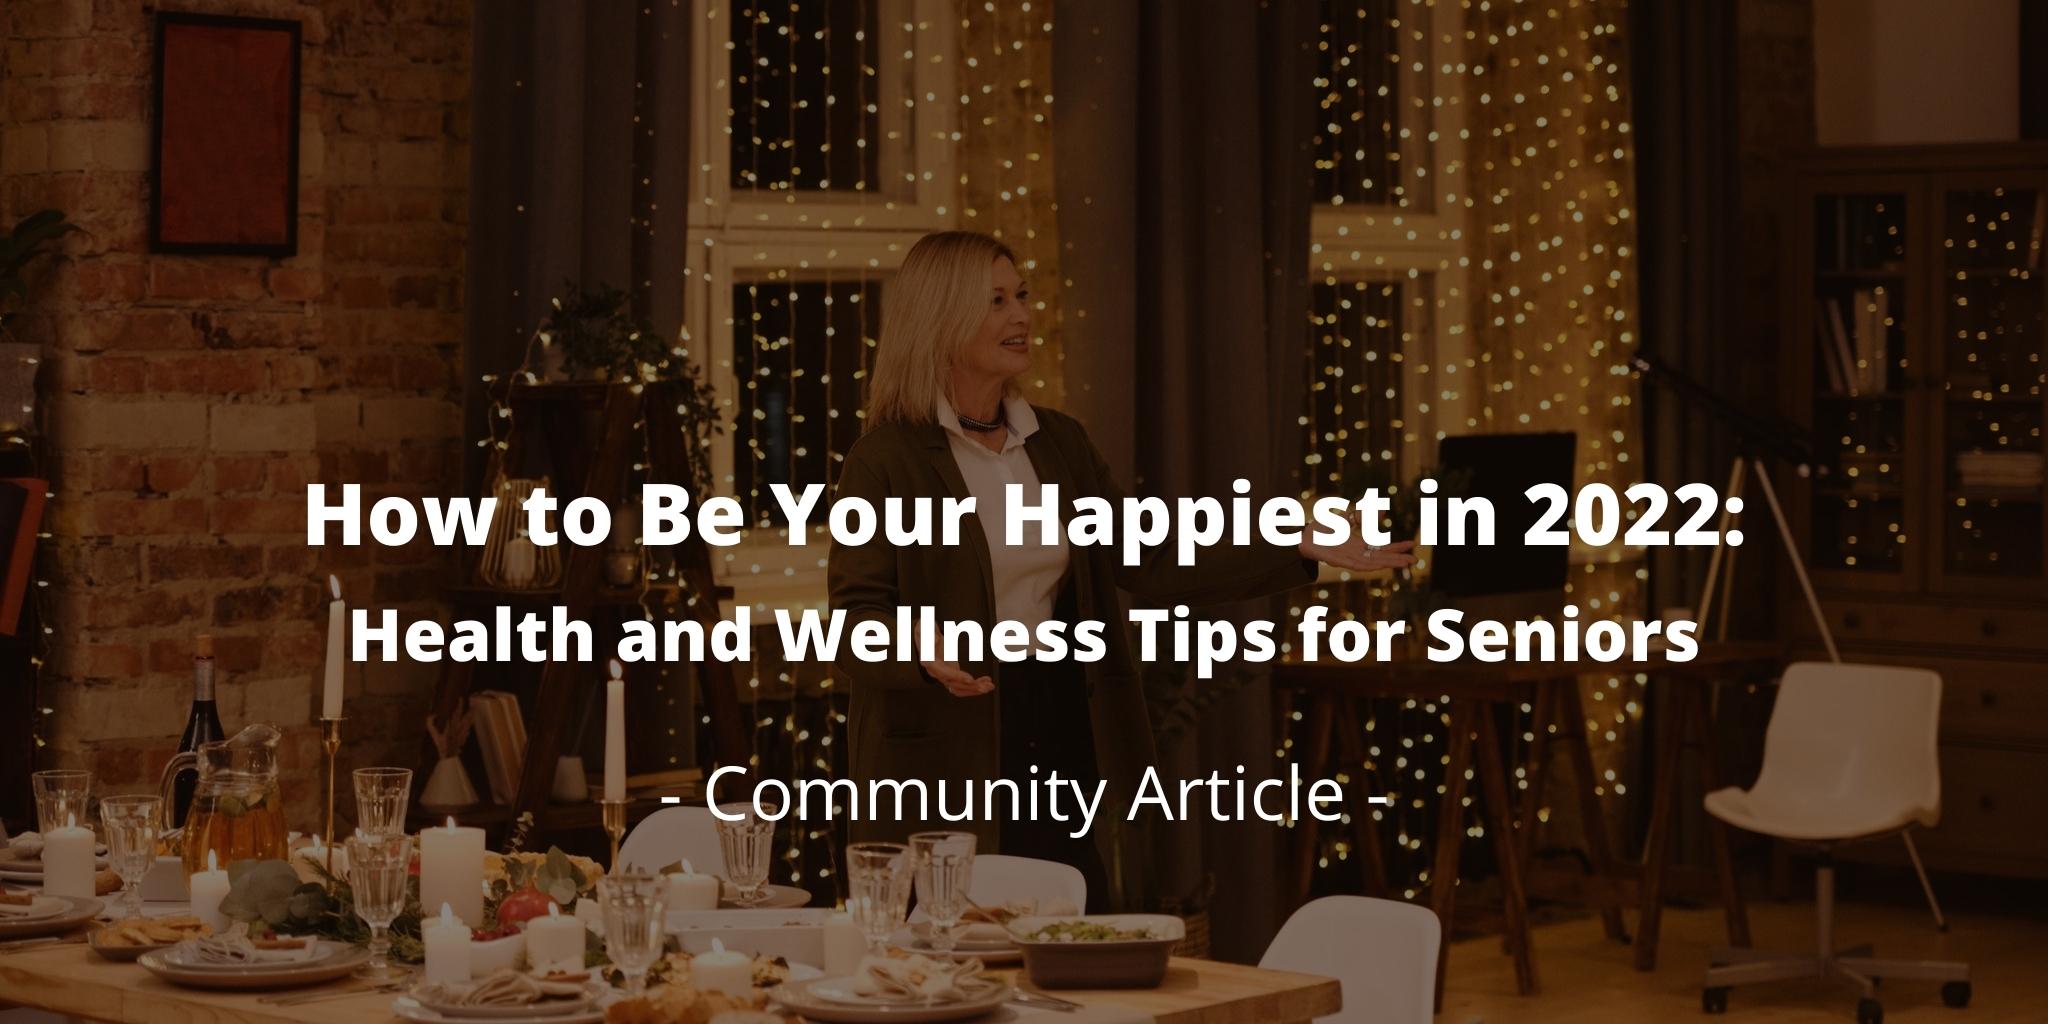 How to Be Your Happiest in 2022: Health and Wellness Tips for Seniors